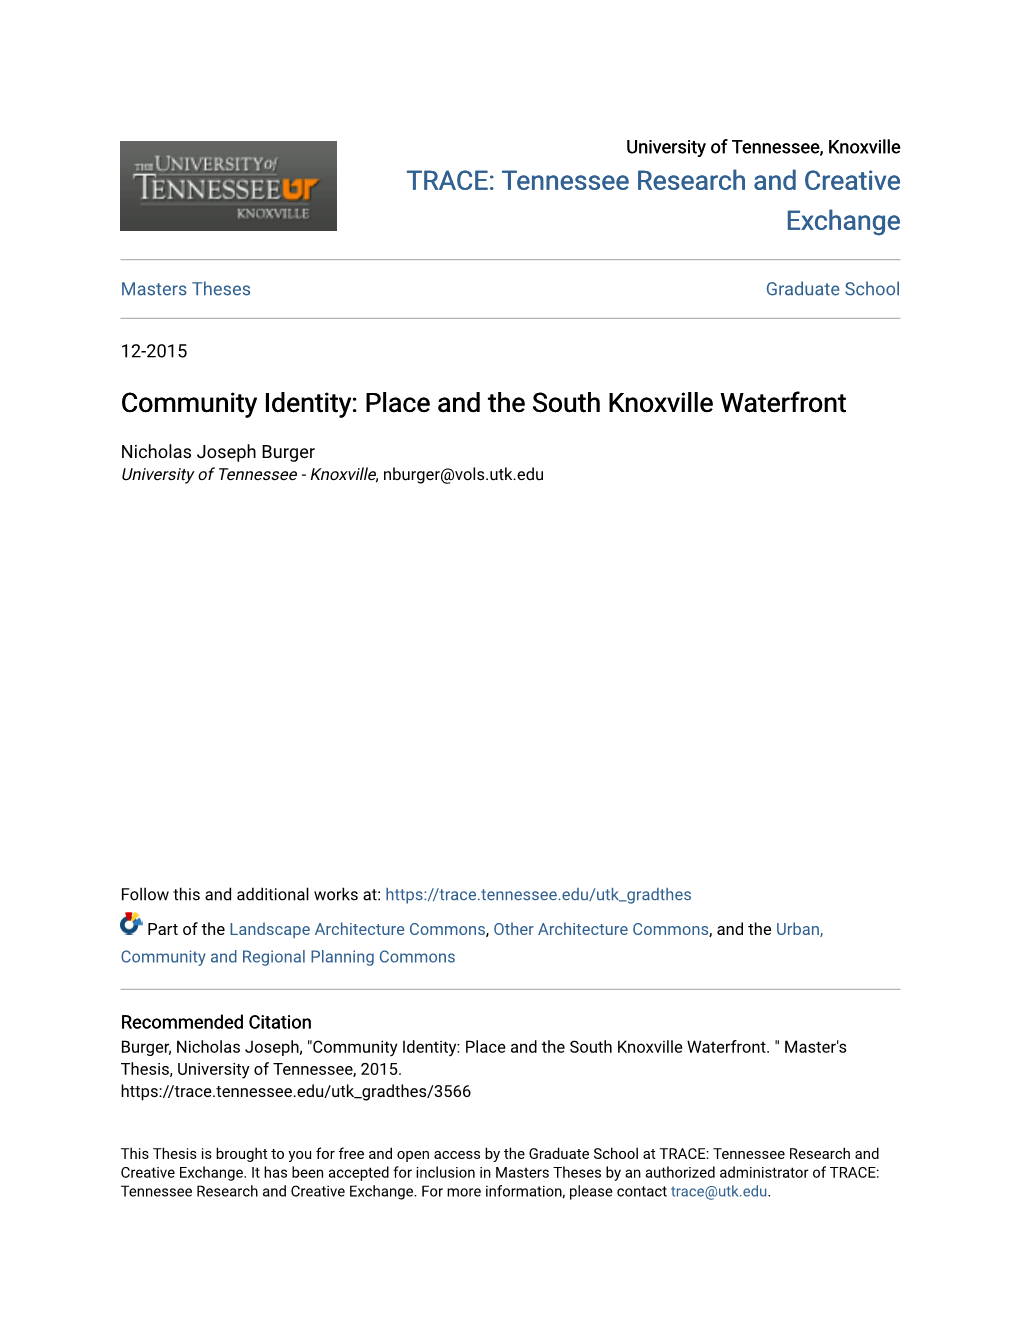 Community Identity: Place and the South Knoxville Waterfront